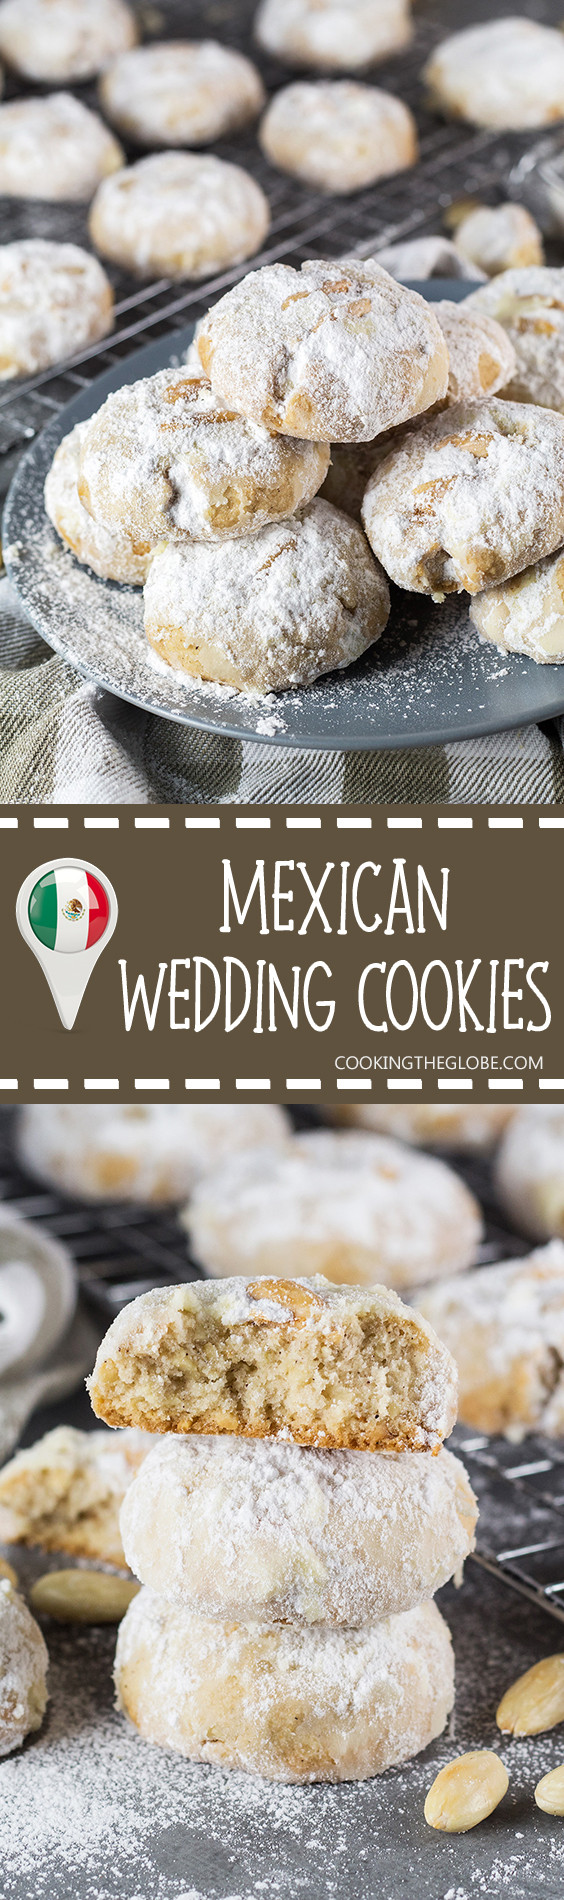 Mexican Cookies Recipes
 Mexican Wedding Cookies Recipe with Almonds Cooking